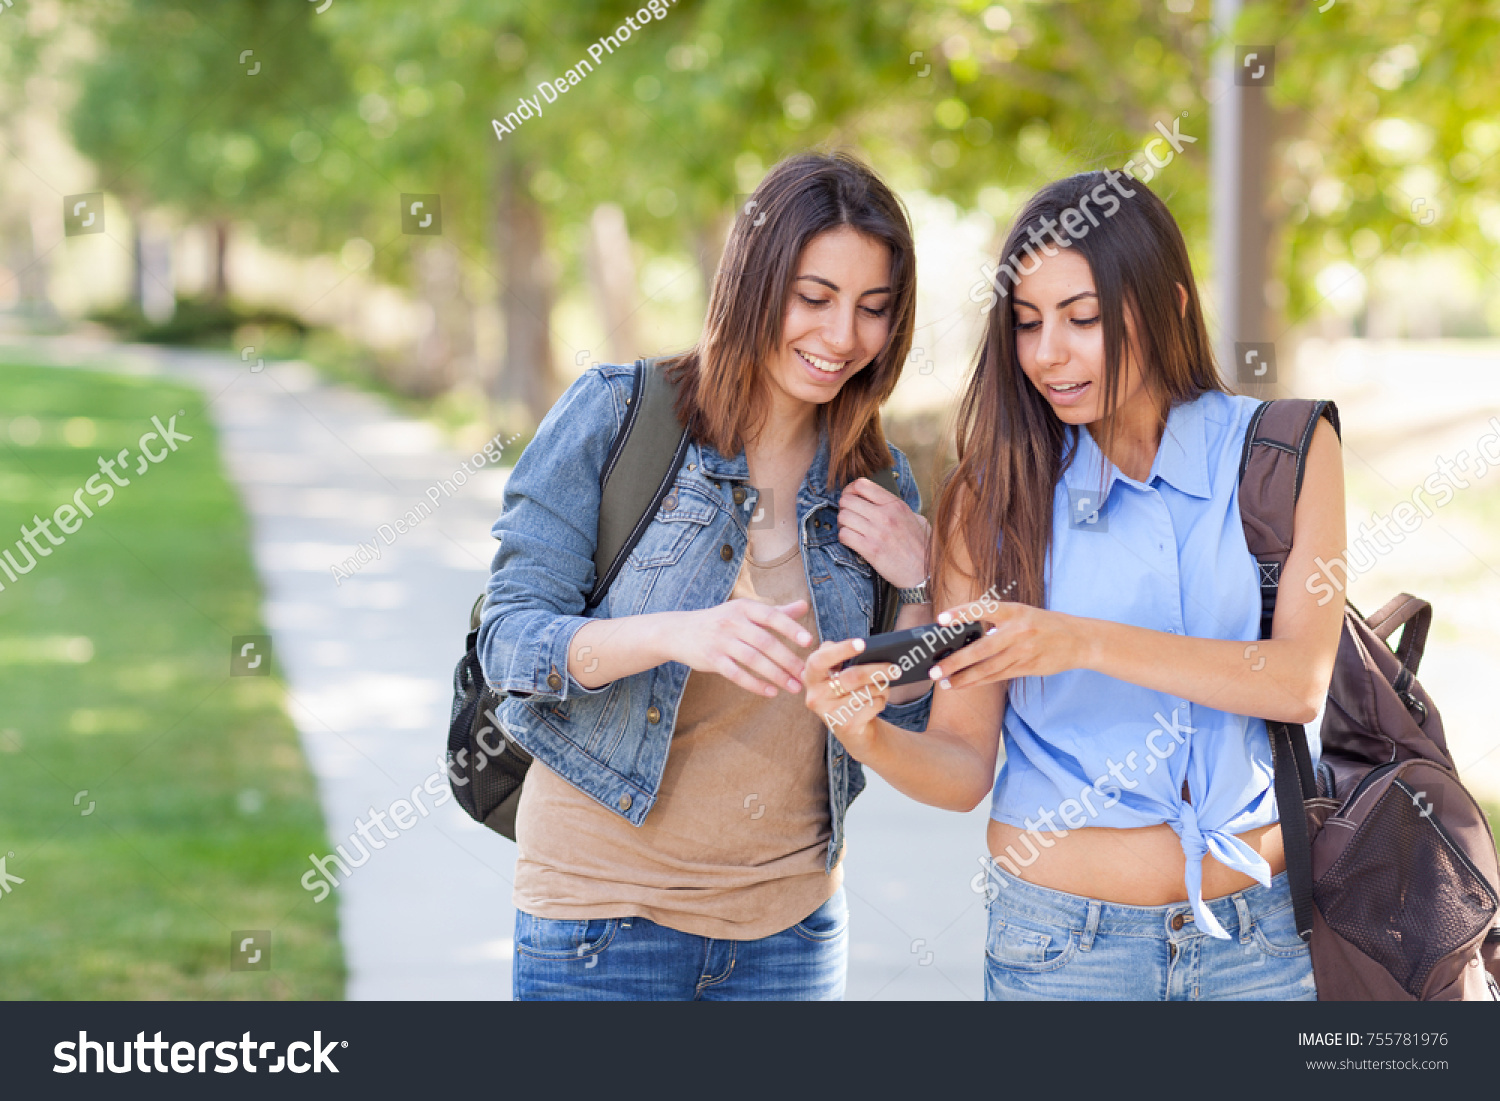 Two Beautiful Young Ethnic Twin Sisters With Backpacks Using A Smartphone Outside. #755781976